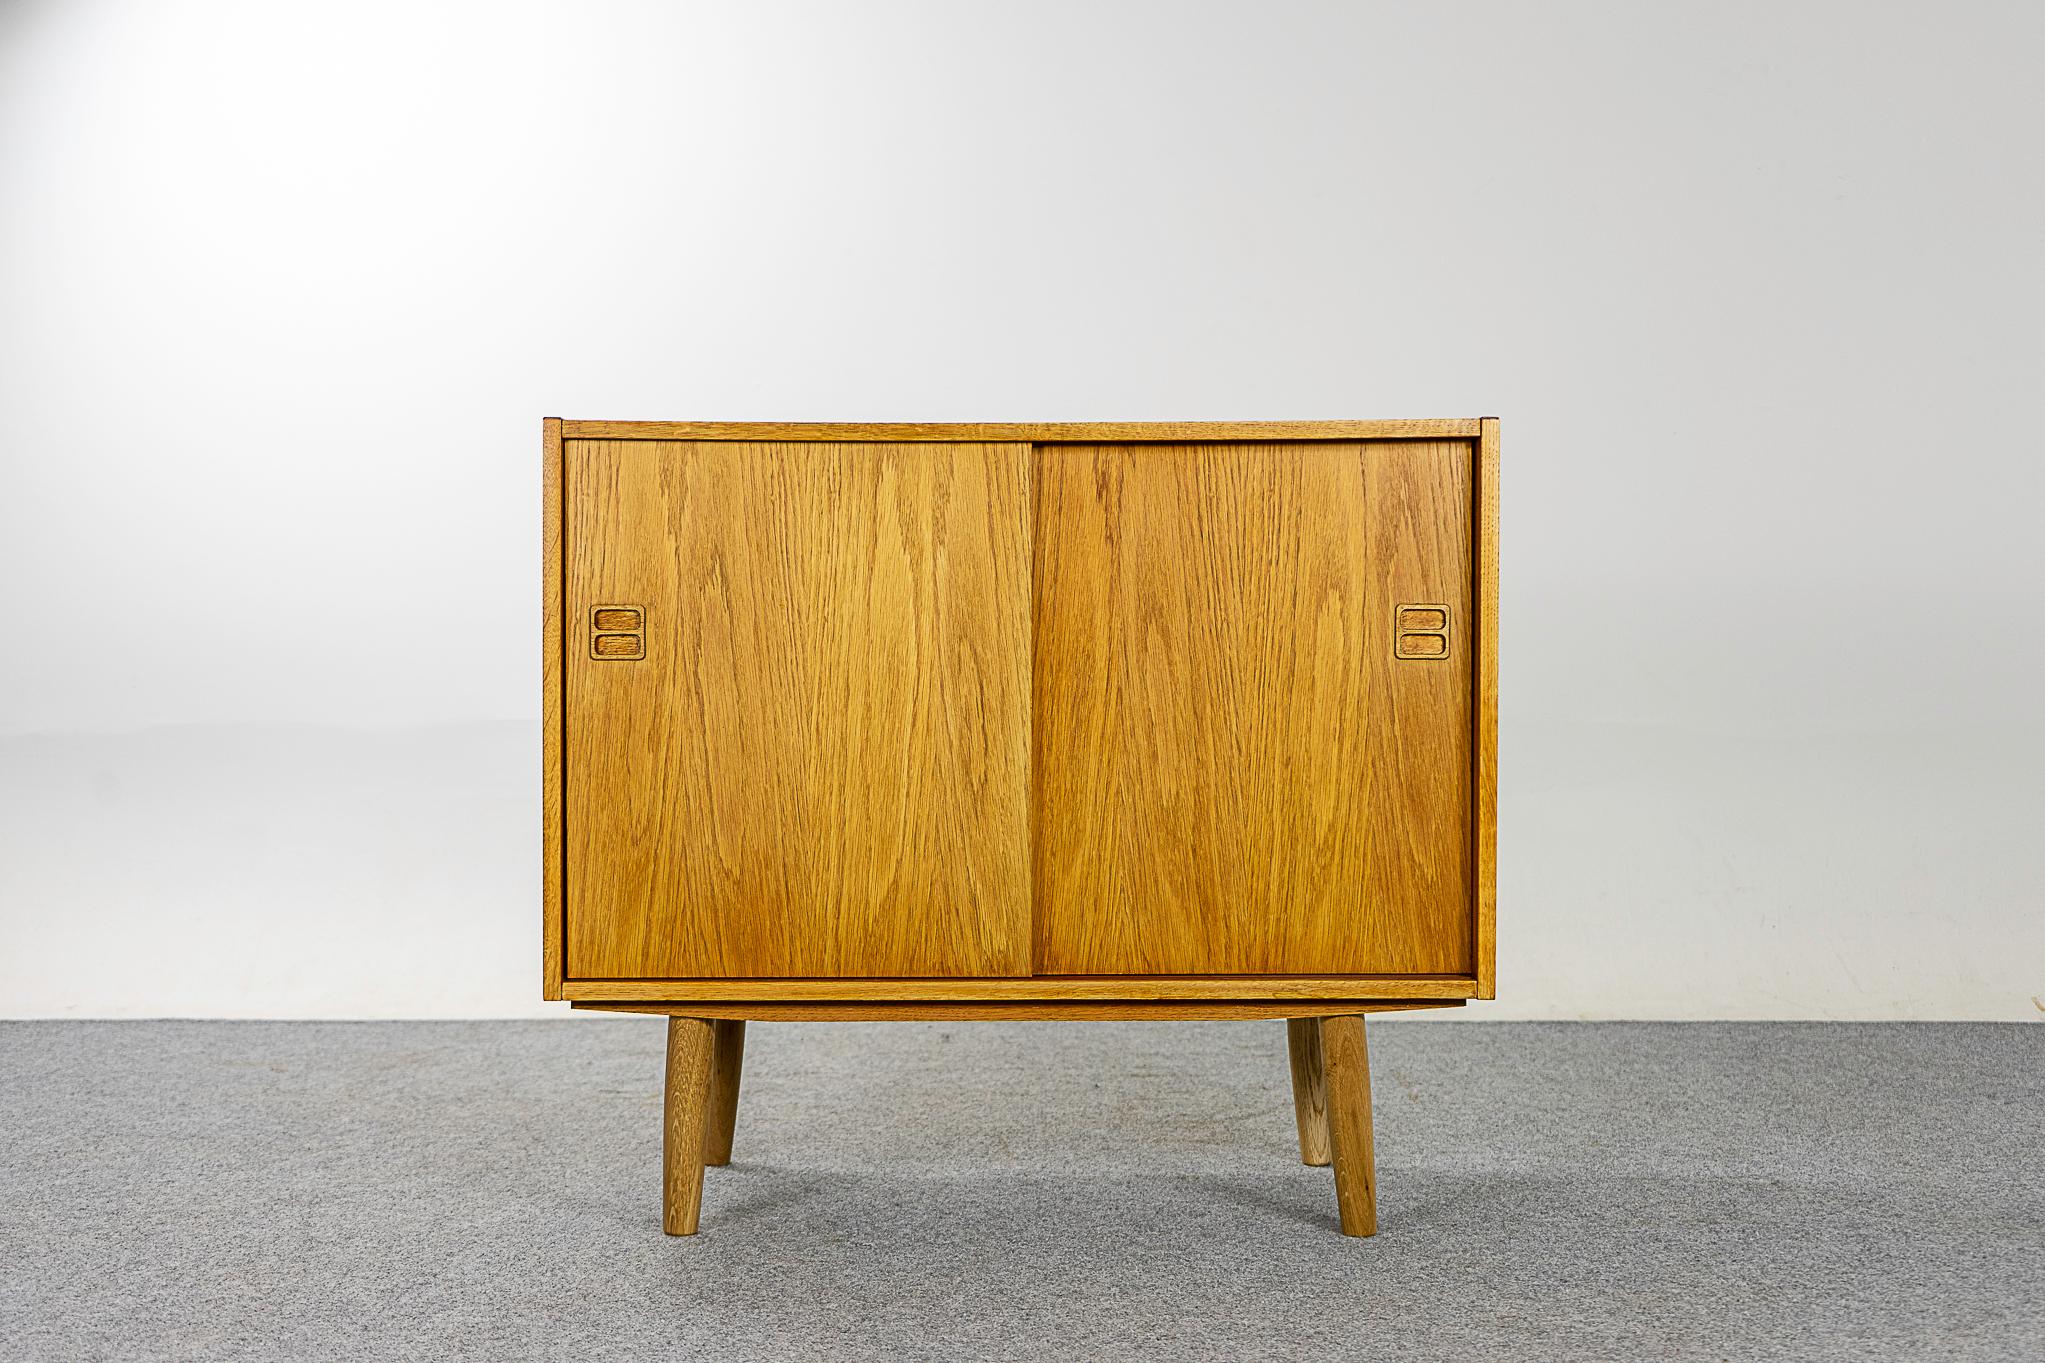 Oak Danish slider cabinet, circa 1960's. Clean, simple lined design highlights the exceptional book-matched veneer. Sliding doors open to reveal interior shelf.

The perfect piece for everyday use.

Please inquire for international shipping rates.